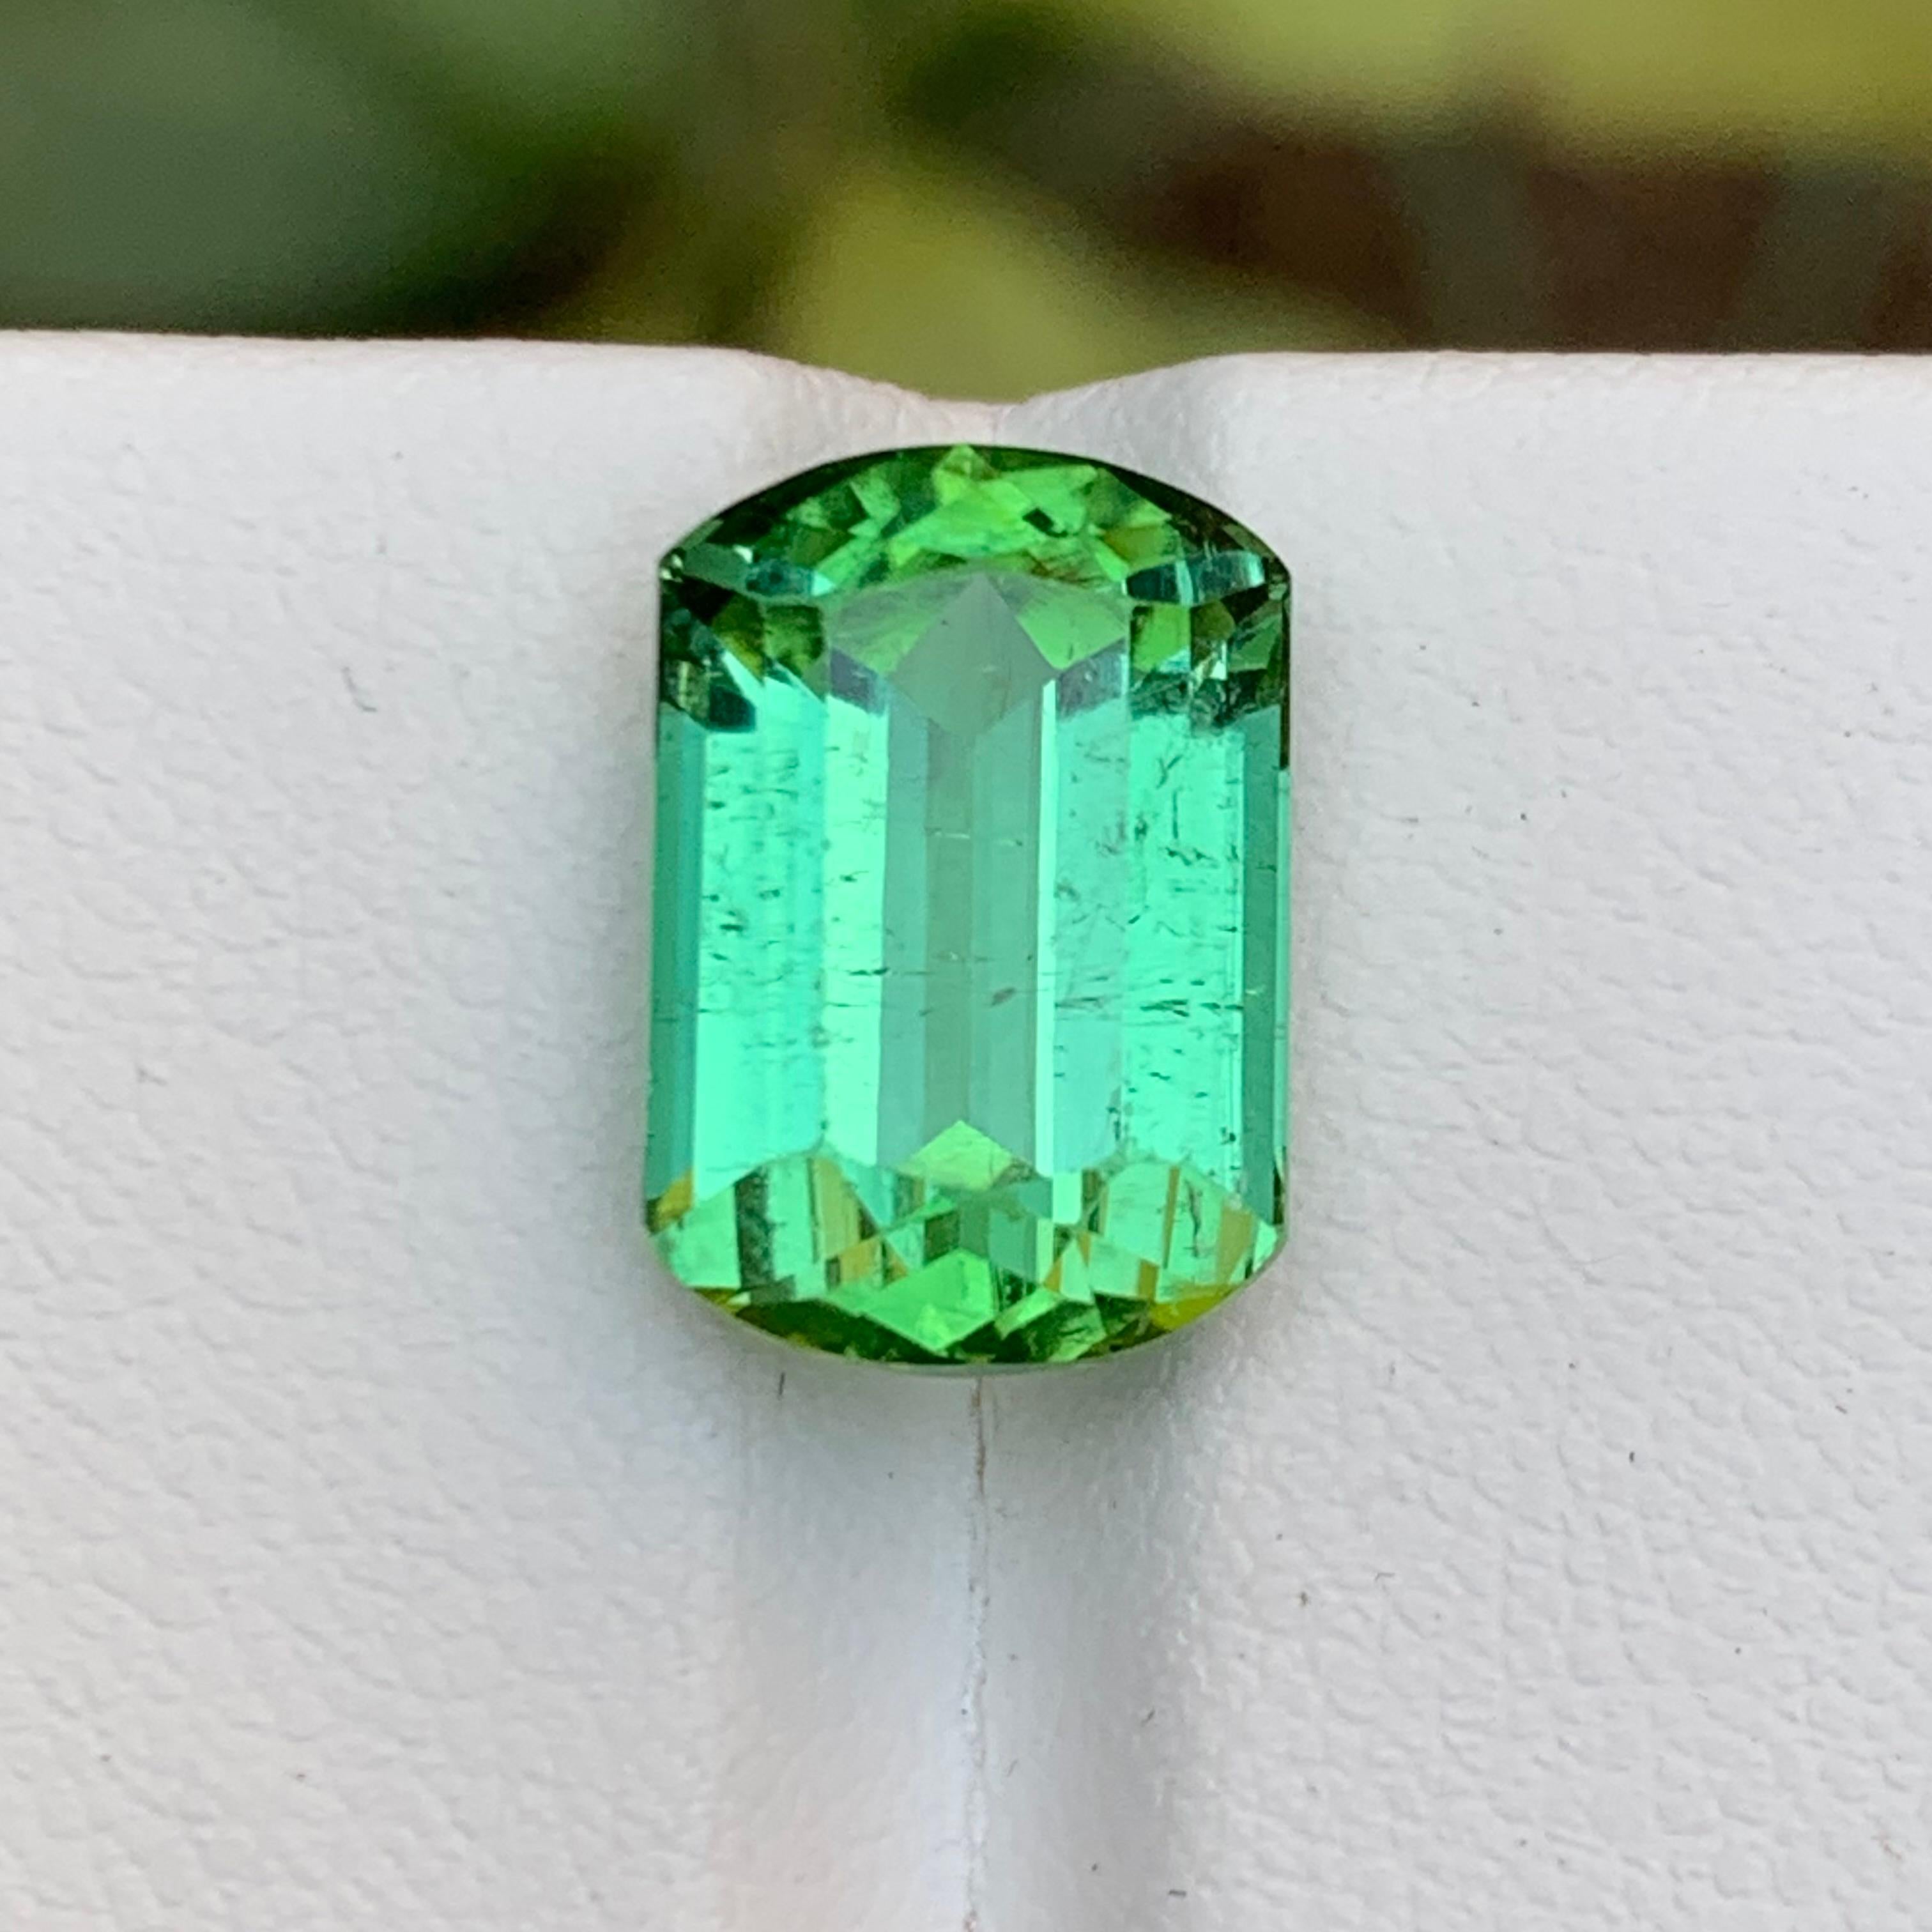 GEMSTONE TYPE: Tourmaline
PIECE(S): 1
WEIGHT: 7.95 Carats
SHAPE: Emerald Cut Modified Cushion Corners
SIZE (MM):  13.70 x 9.34 x 7.42
COLOR: Mint Green
CLARITY: Slightly Included 
TREATMENT: None
ORIGIN: Afghanistan 🇦🇫 
CERTIFICATE: On